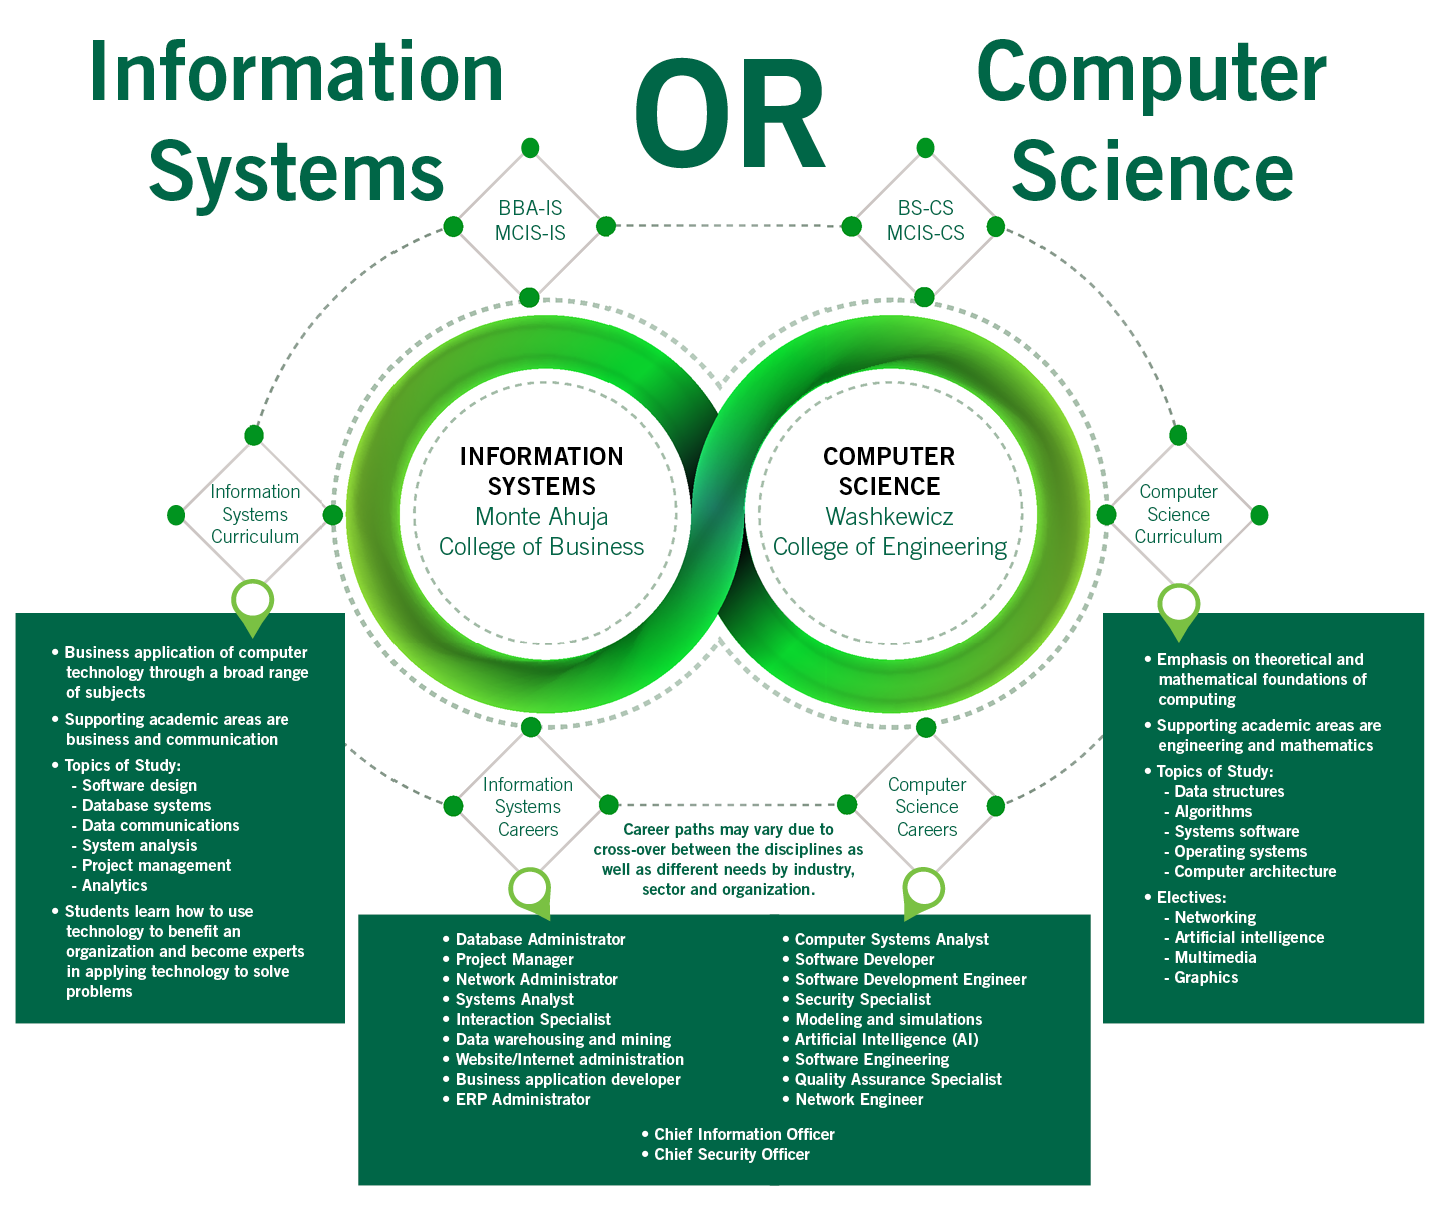 Computer Information Science or Information Systems?